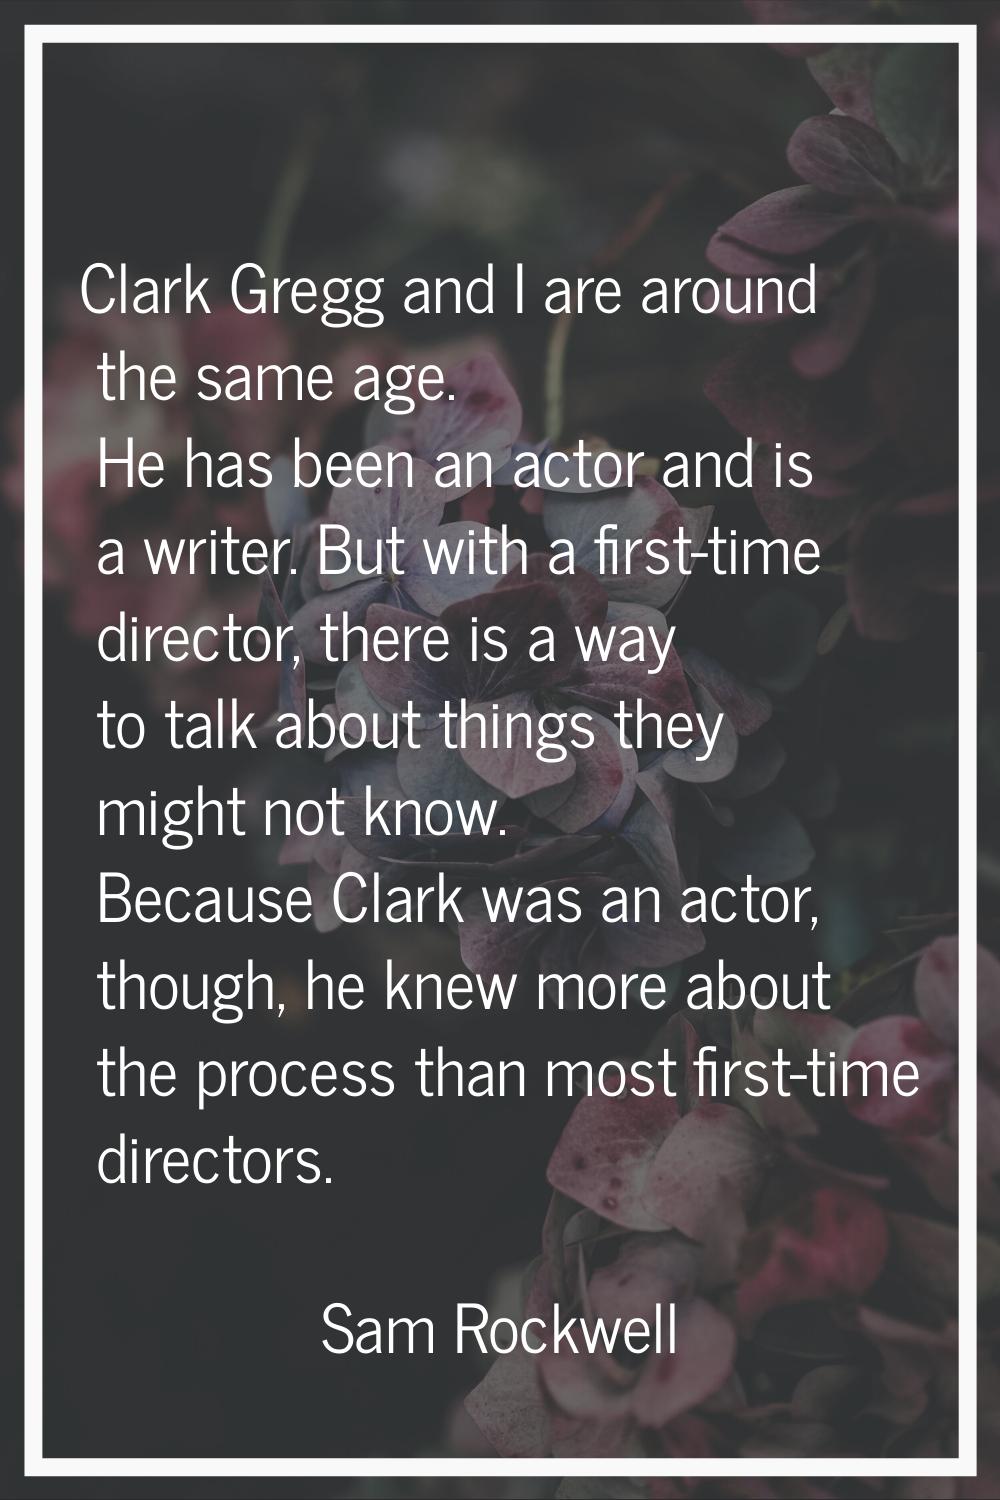 Clark Gregg and I are around the same age. He has been an actor and is a writer. But with a first-t